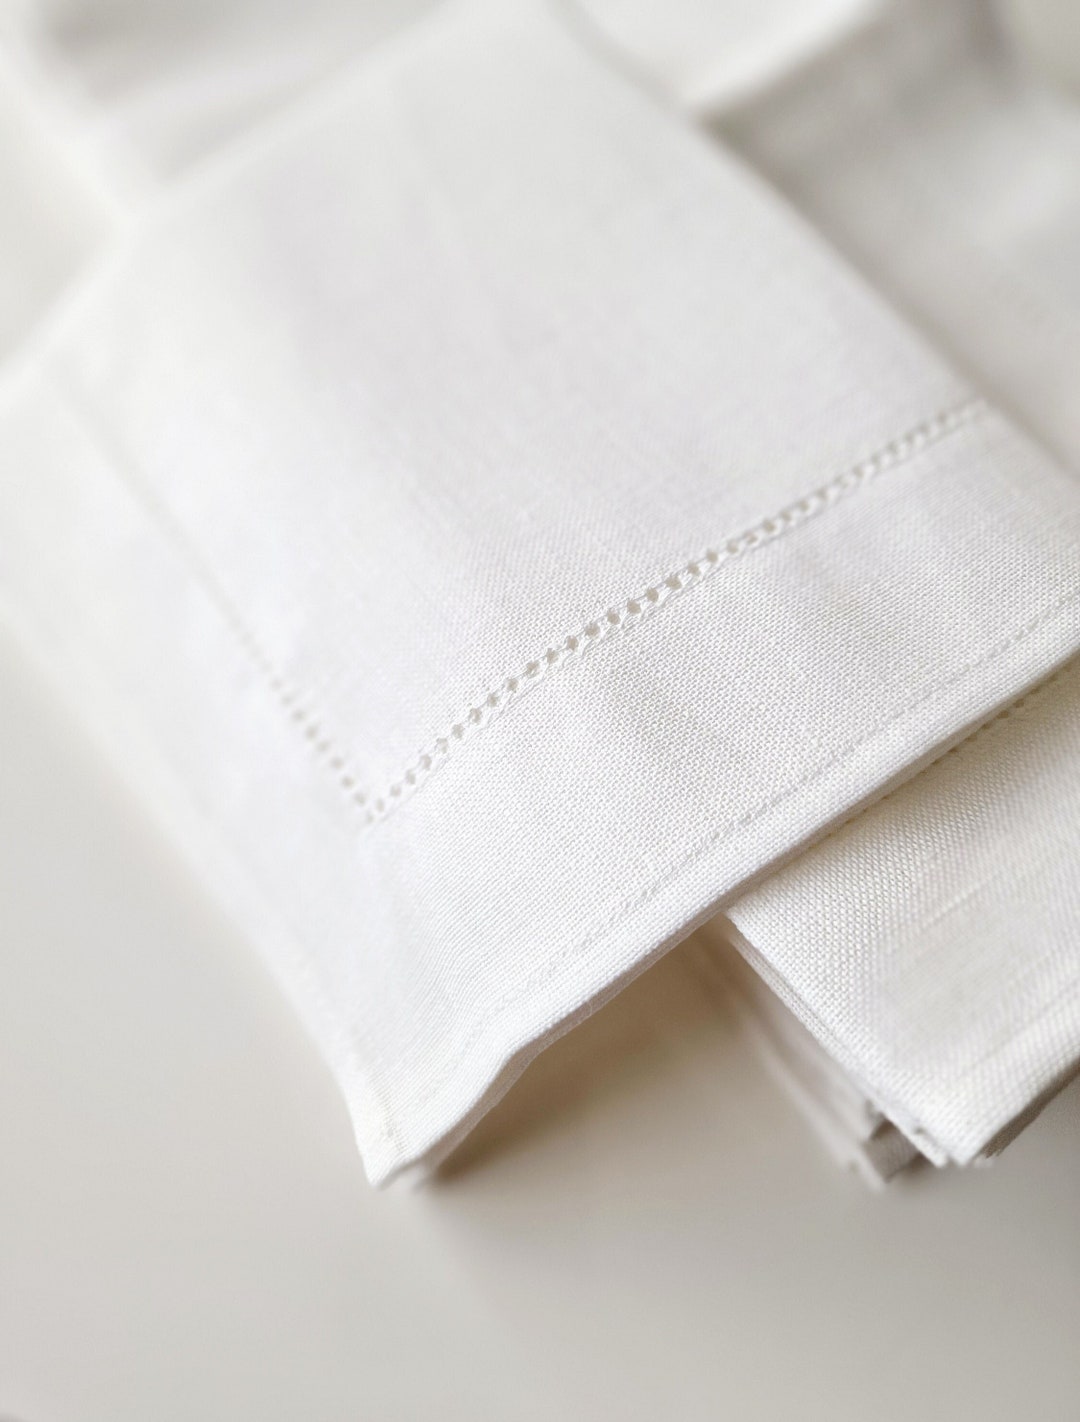 Linen Napkins Hemstitched Wedding Napkins White or Natural Embroidery ...